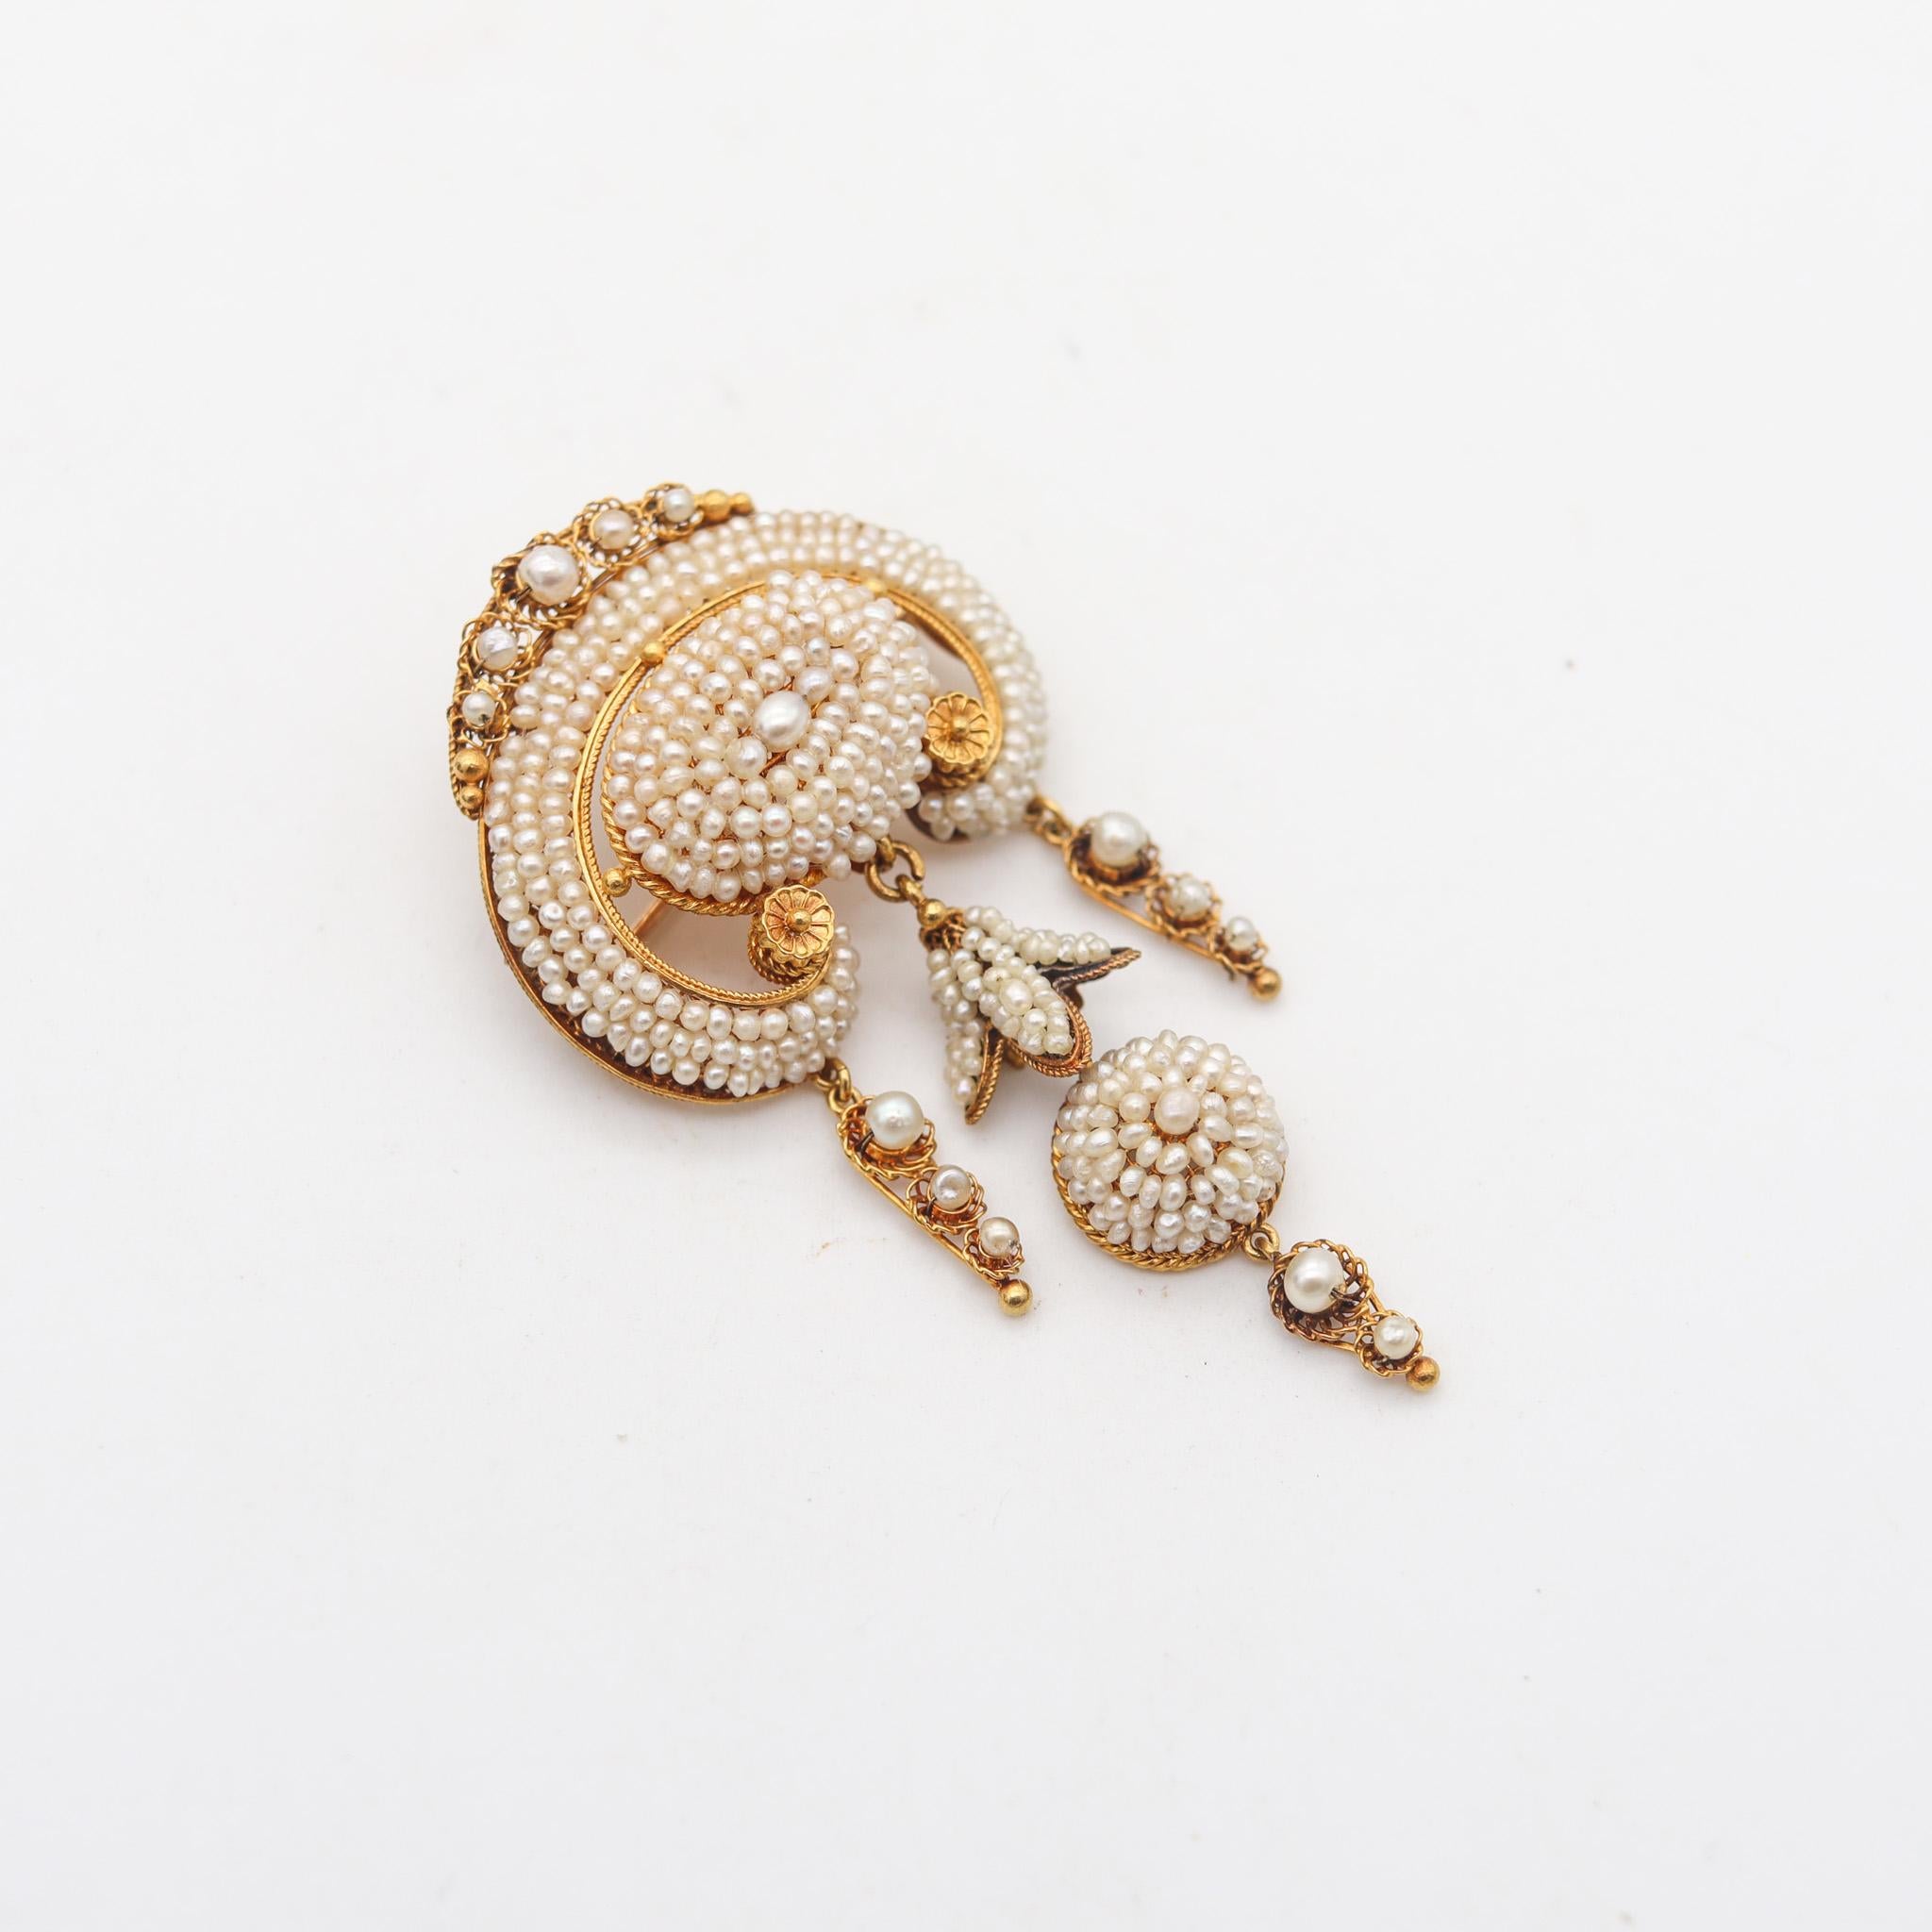 High Victorian Portuguese Iberian 1850 Filigree Brooch In 21Kt Yellow Gold With Seed Pearls For Sale